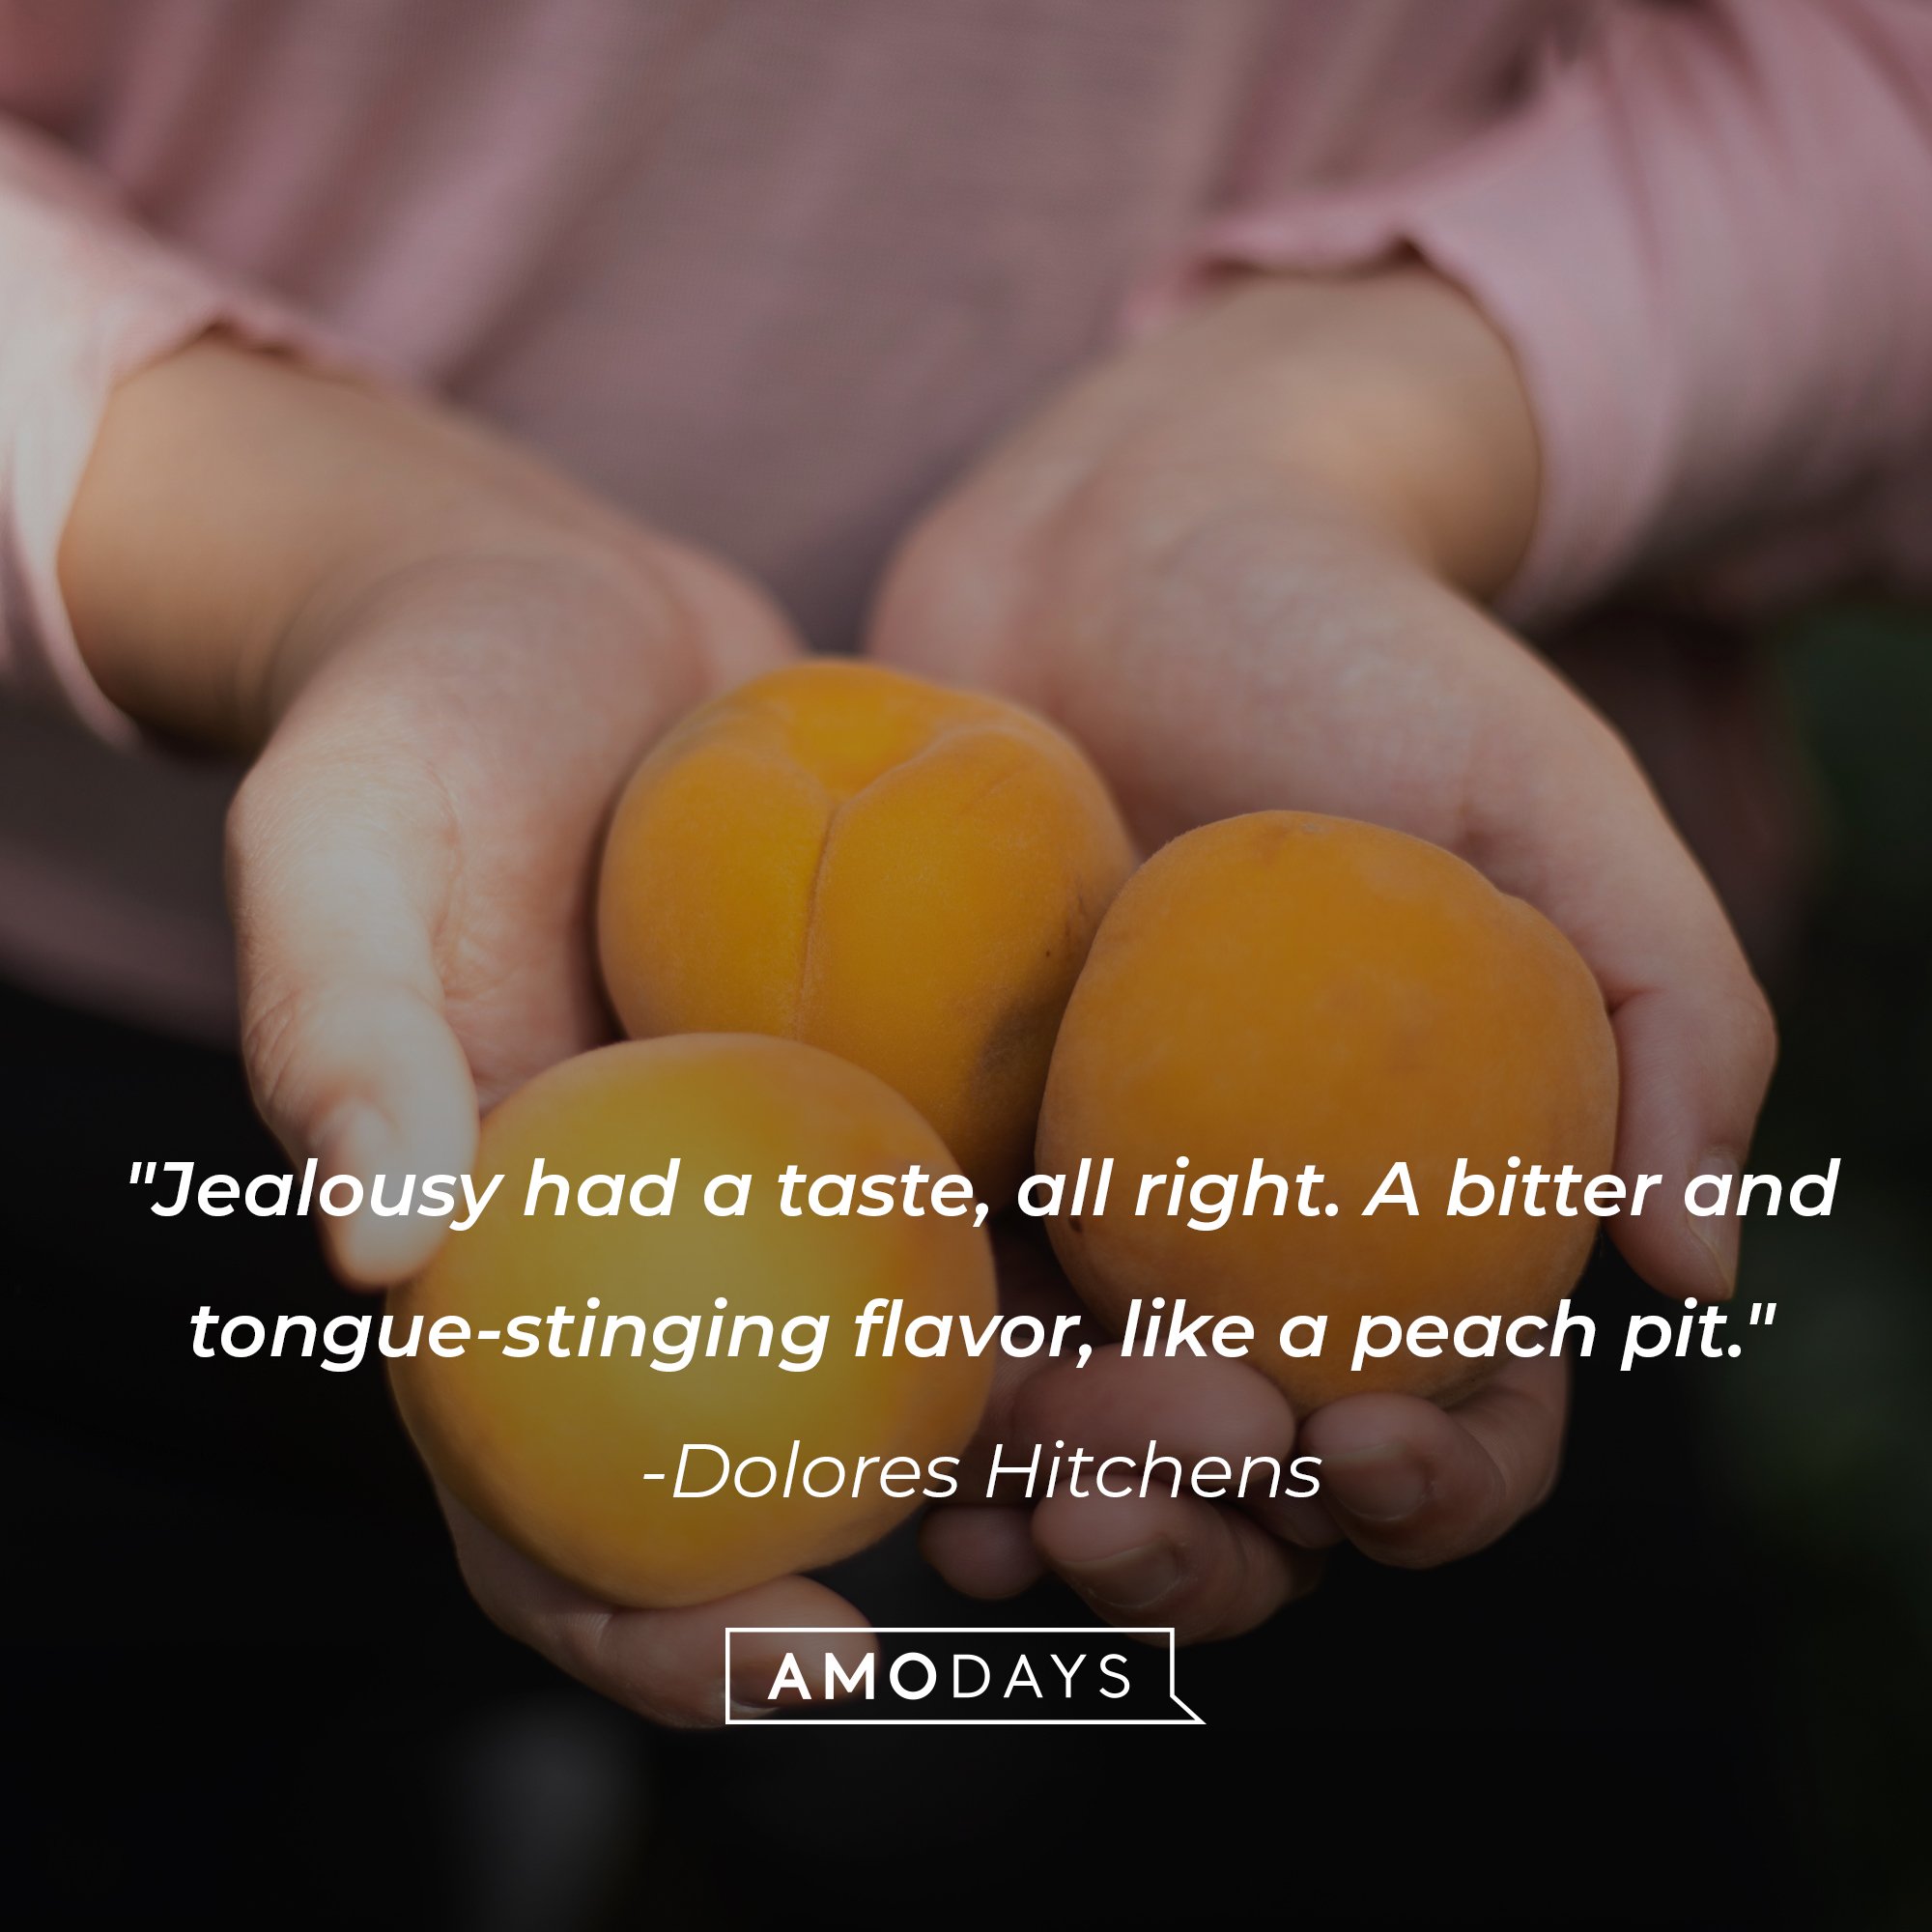 Dolores Hitchens' quote: "Jealousy had a taste, all right. A bitter and tongue-stinging flavor, like a peach pit." | Image: AmoDays